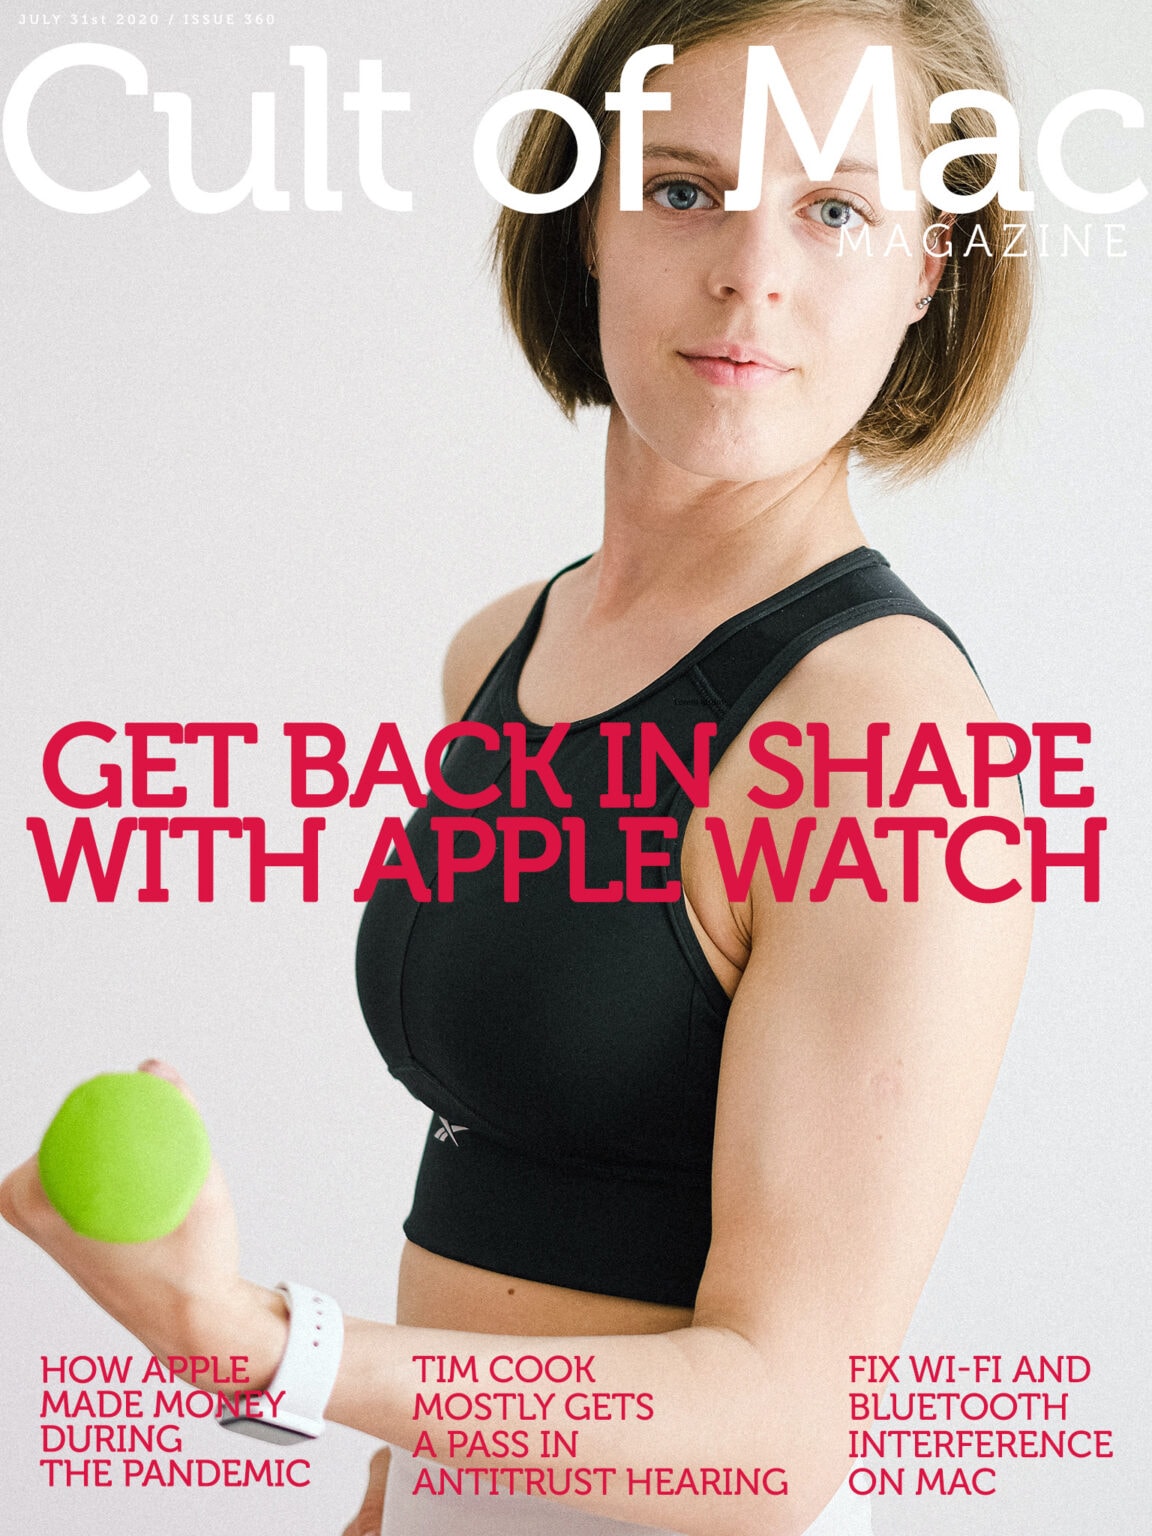 Time to get back in the game! Here's how to get back in shape with Apple Watch.